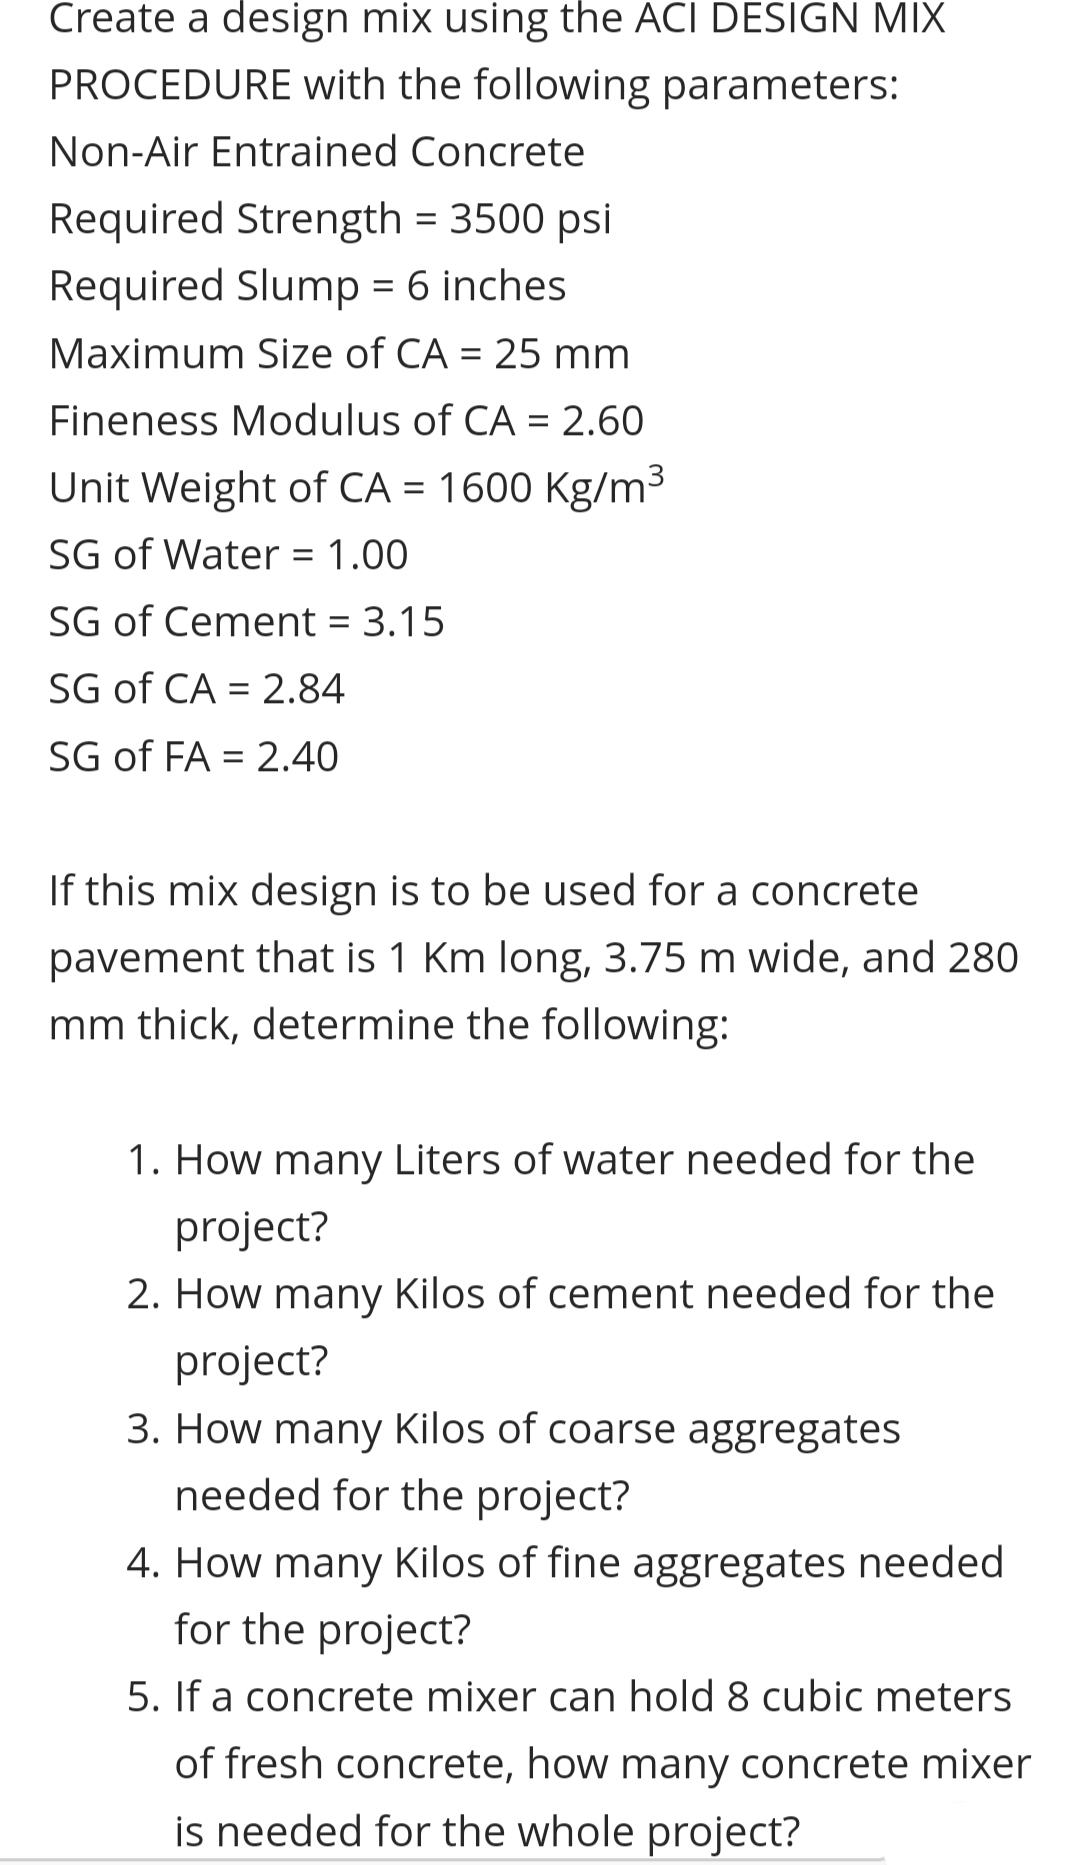 Create a design mix using the ACI DESIGN MIX
PROCEDURE with the following parameters:
Non-Air Entrained Concrete
Required Strength = 3500 psi
Required Slump = 6 inches
Maximum Size of CA = 25 mm
%3D
Fineness Modulus of CA = 2.60
Unit Weight of CA = 1600 Kg/m3
SG of Water = 1.00
SG of Cement = 3.15
SG of CA = 2.84
SG of FA = 2.40
%3D
If this mix design is to be used for a concrete
pavement that is 1 Km long, 3.75 m wide, and 280
mm thick, determine the following:
1. How many Liters of water needed for the
project?
2. How many Kilos of cement needed for the
project?
3. How many Kilos of coarse aggregates
needed for the project?
4. How many Kilos of fine aggregates needed
for the project?
5. If a concrete mixer can hold 8 cubic meters
of fresh concrete, how many concrete mixer
is needed for the whole project?
